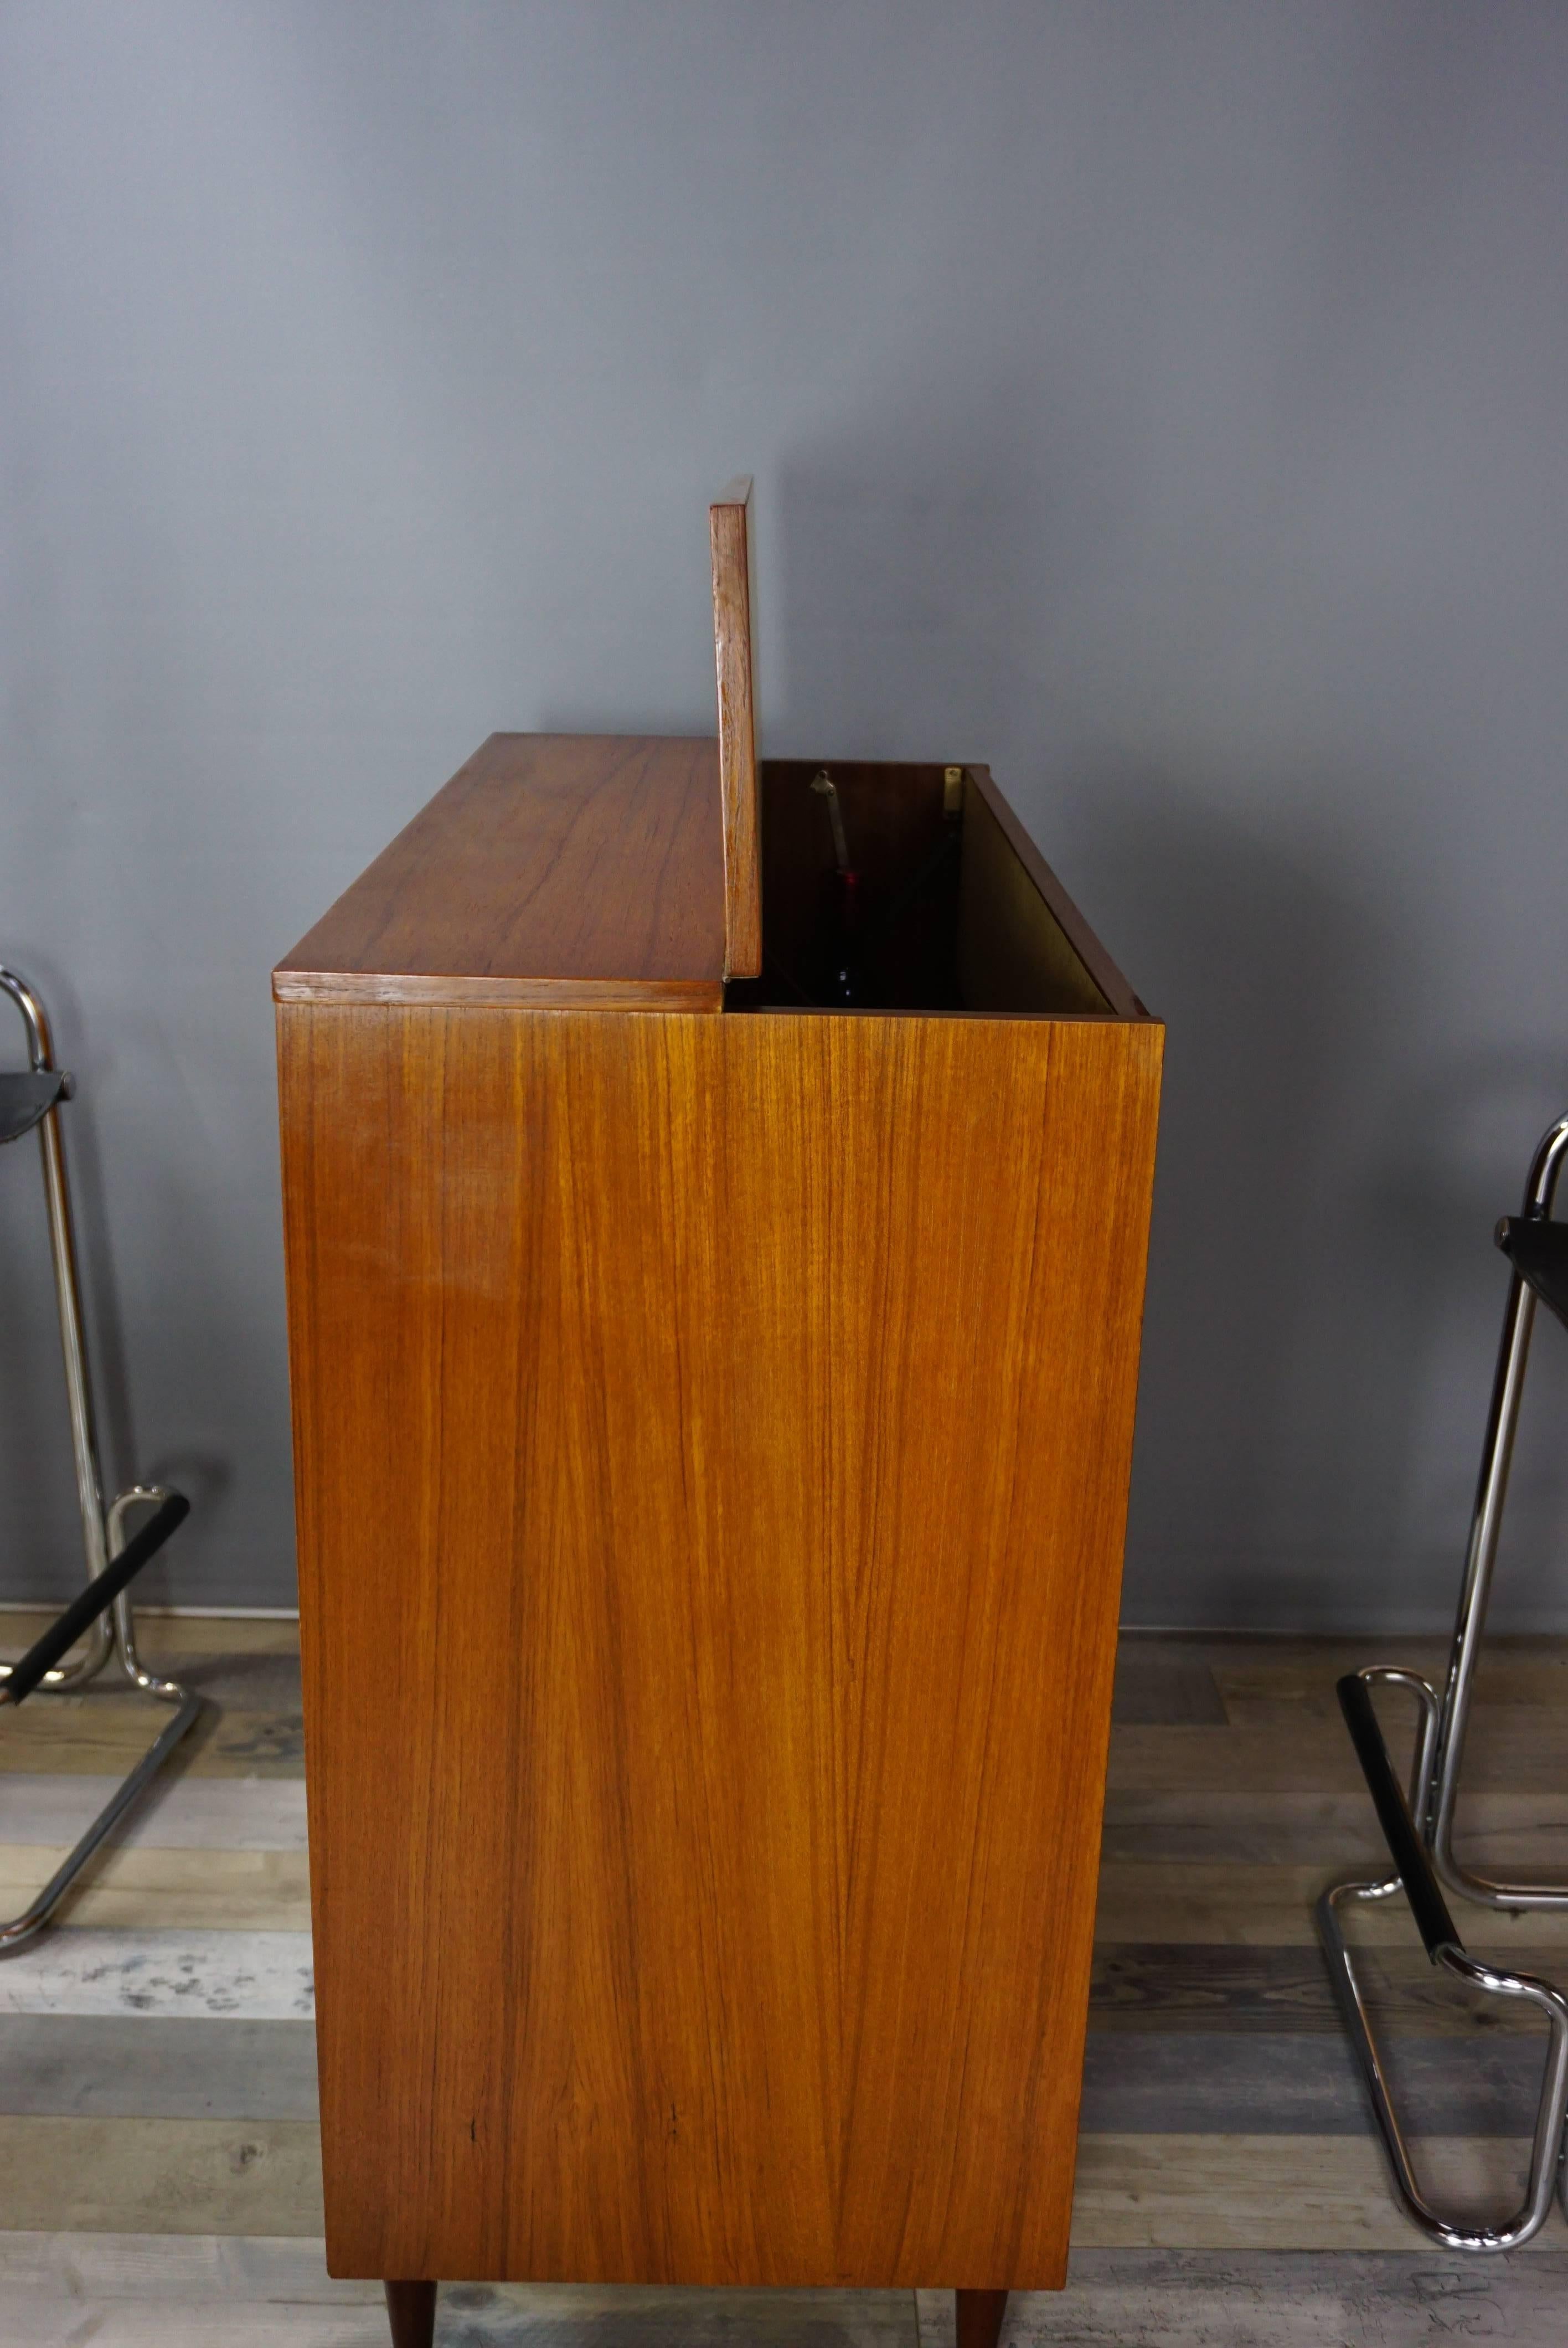 Mid-Century Modern Ceraùic and Wooden Teak Bar Cabinet from the 1960s